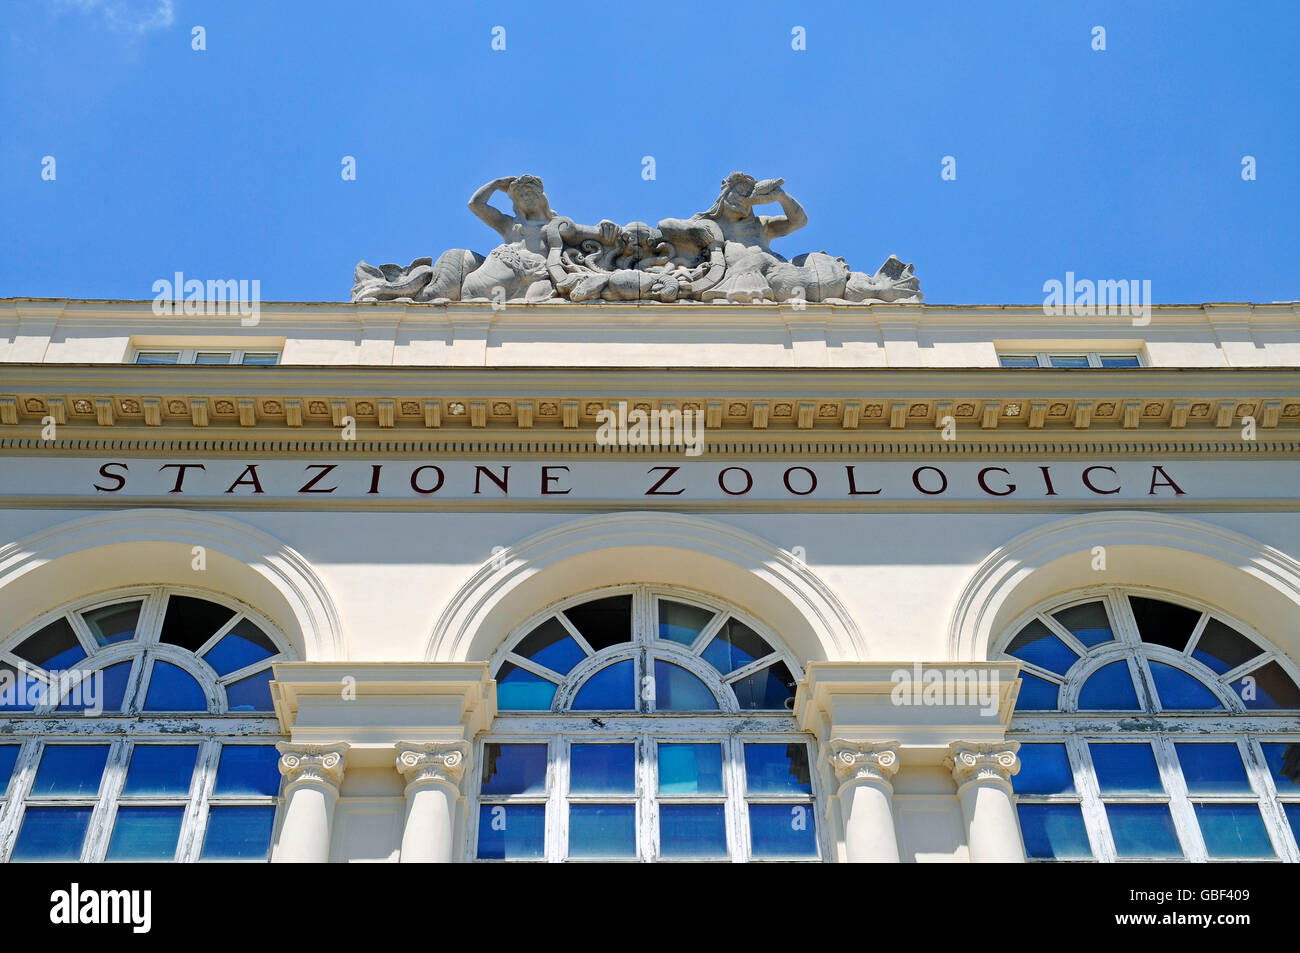 Stazione Zoologica, Zoological Station, Biological Research Institute, L' Acquario, Maritime Museum, Naples, Campania, Italy Stock Photo - Alamy